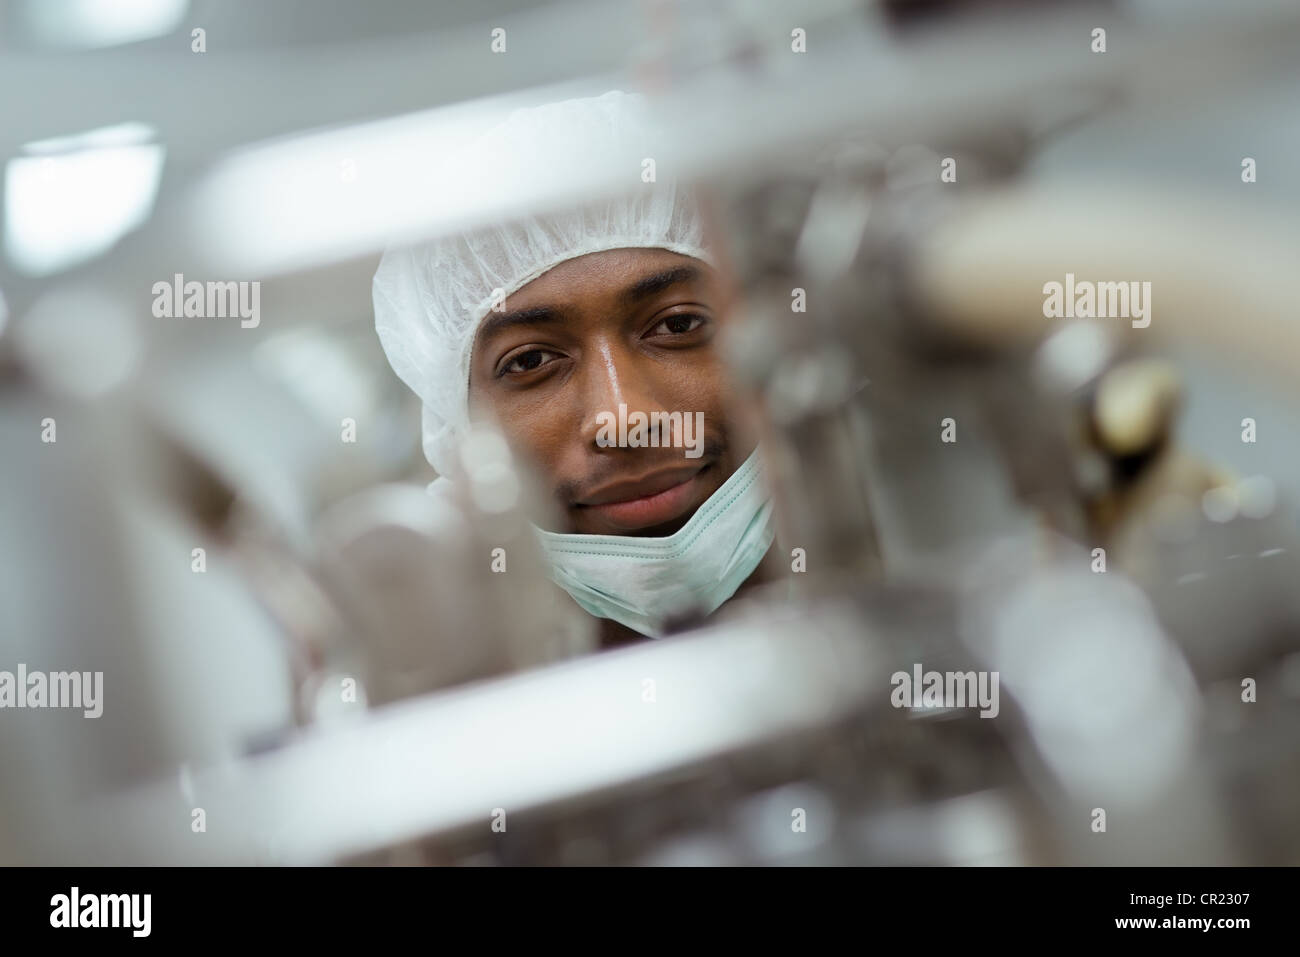 Lab technician working as researcher in biotechnology plant with machinery Stock Photo